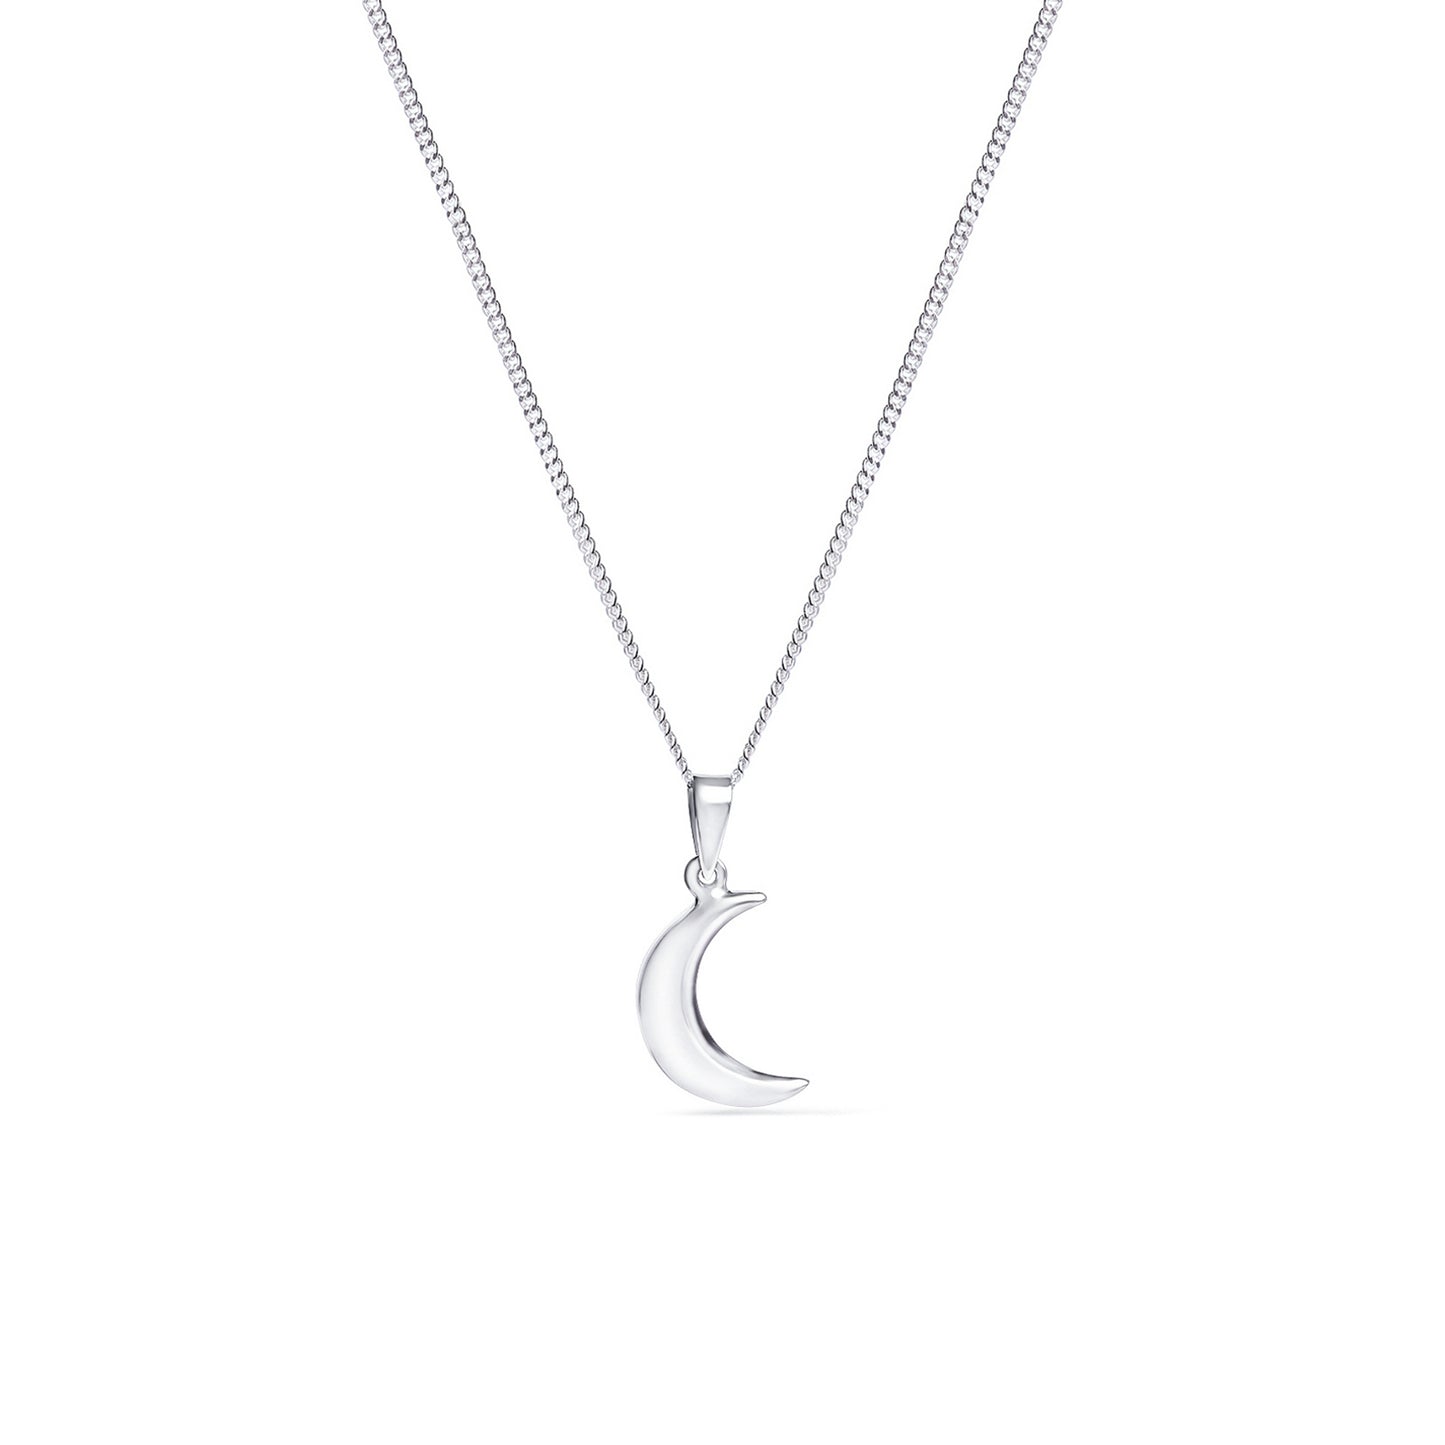 Sterling Silver Moon Pendant Necklace on 16" Chain - 15mm x 4mm